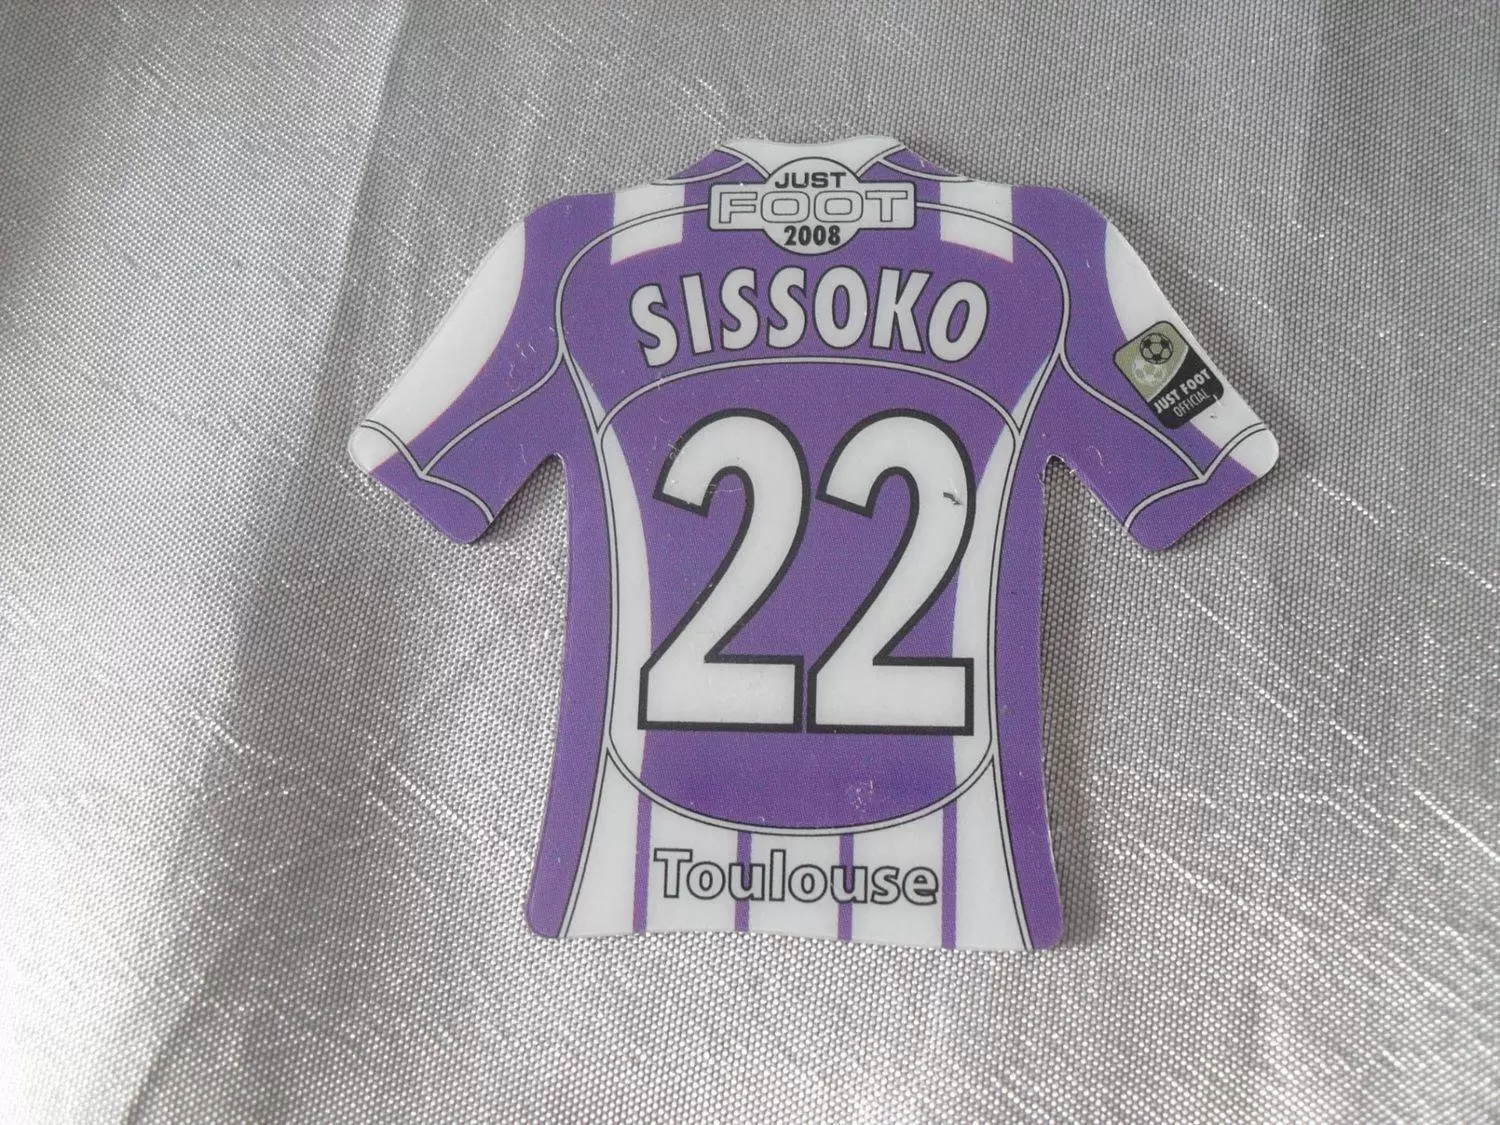 Just Foot 2008 - Toulouse 22 - Sissoko